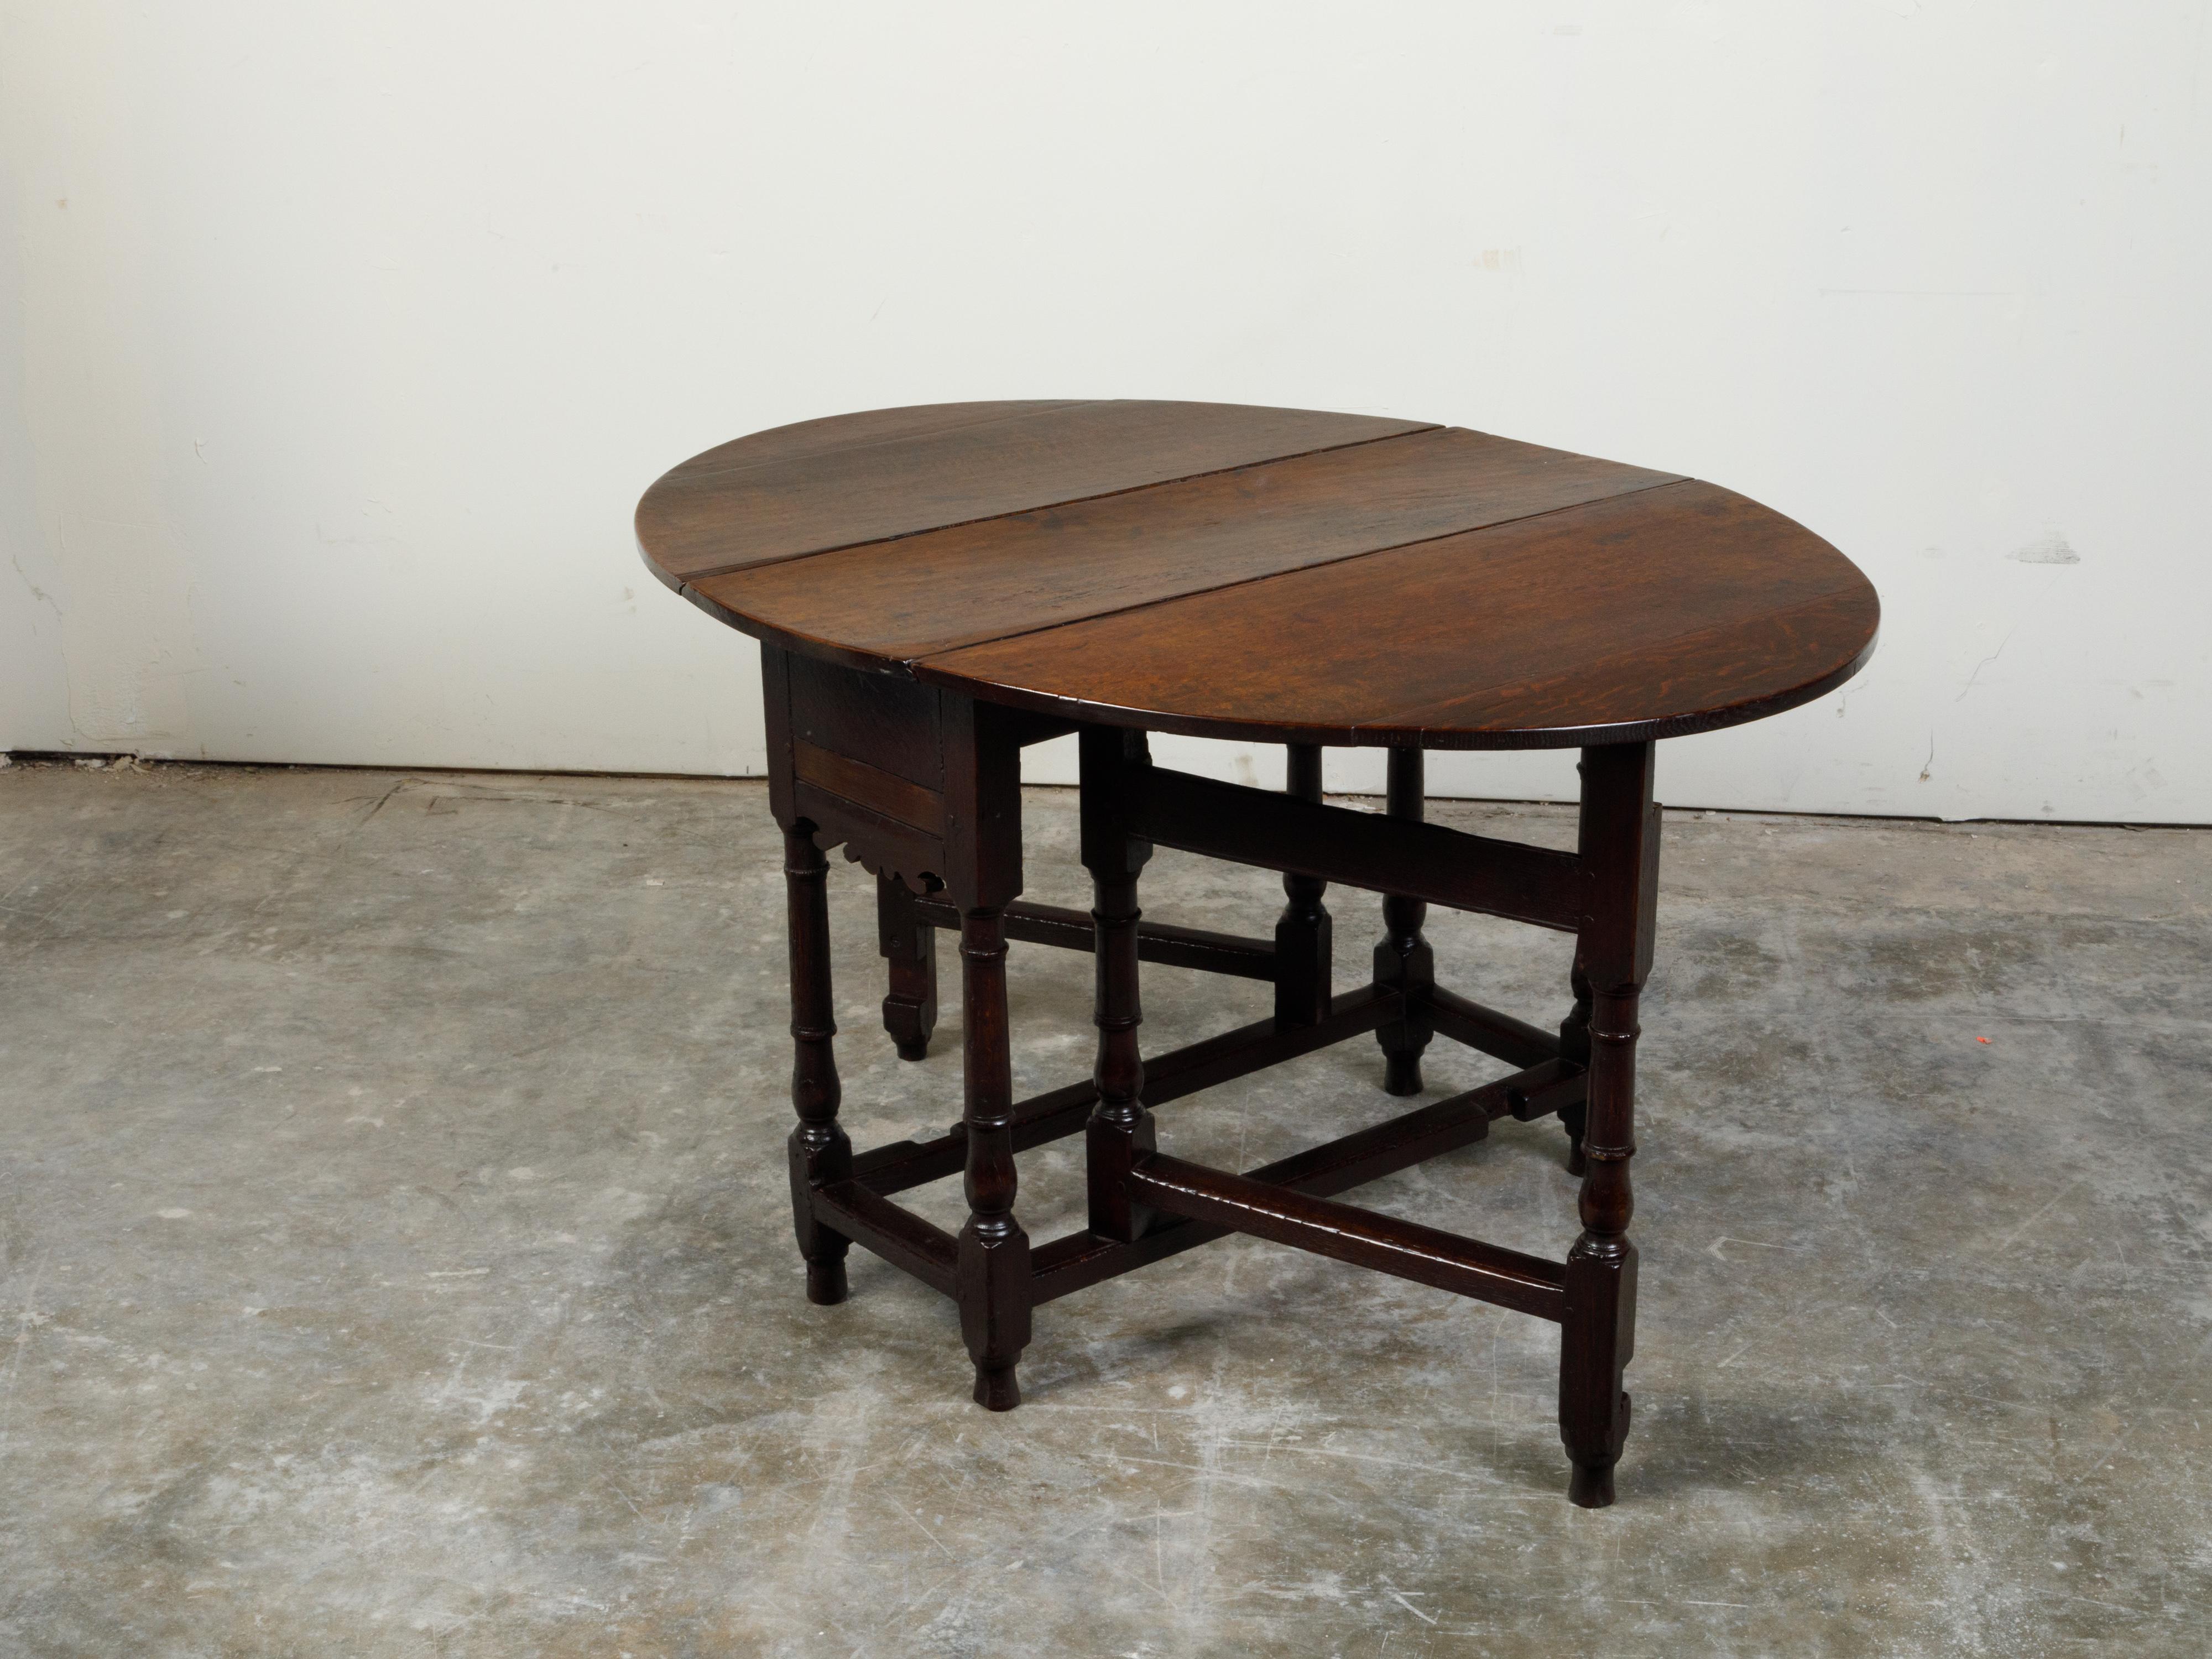 English 18th Century Oval Top Drop-Leaf Gateleg Table with Turned Legs In Good Condition For Sale In Atlanta, GA